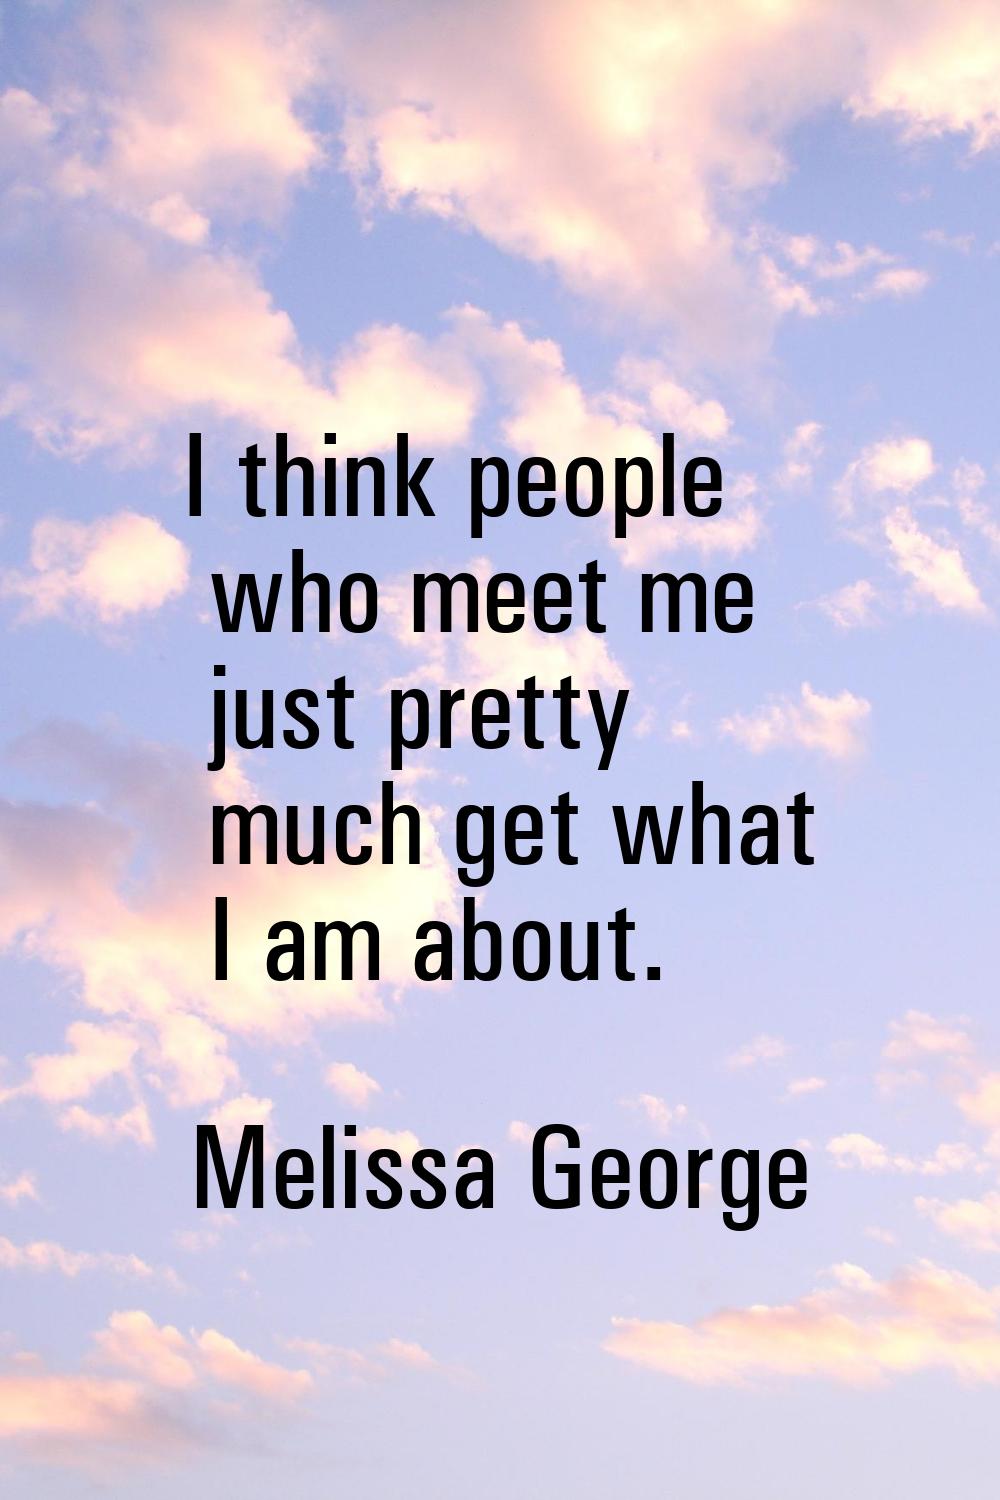 I think people who meet me just pretty much get what I am about.